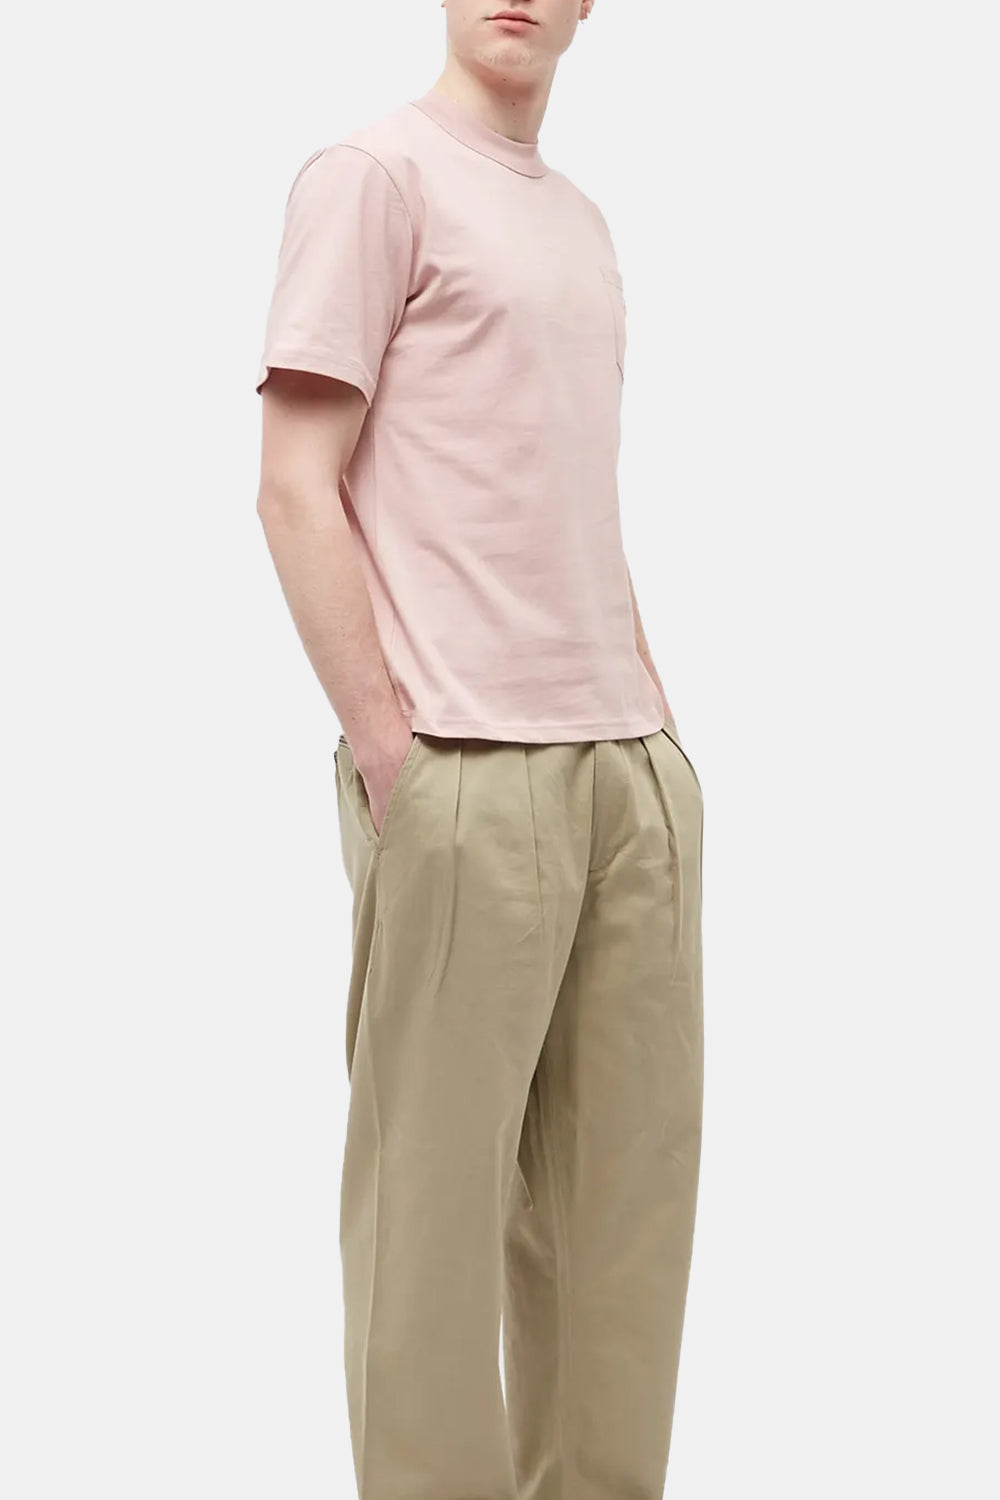 Armor Lux Heritage Pocket T-Shirt (Antic Pink)